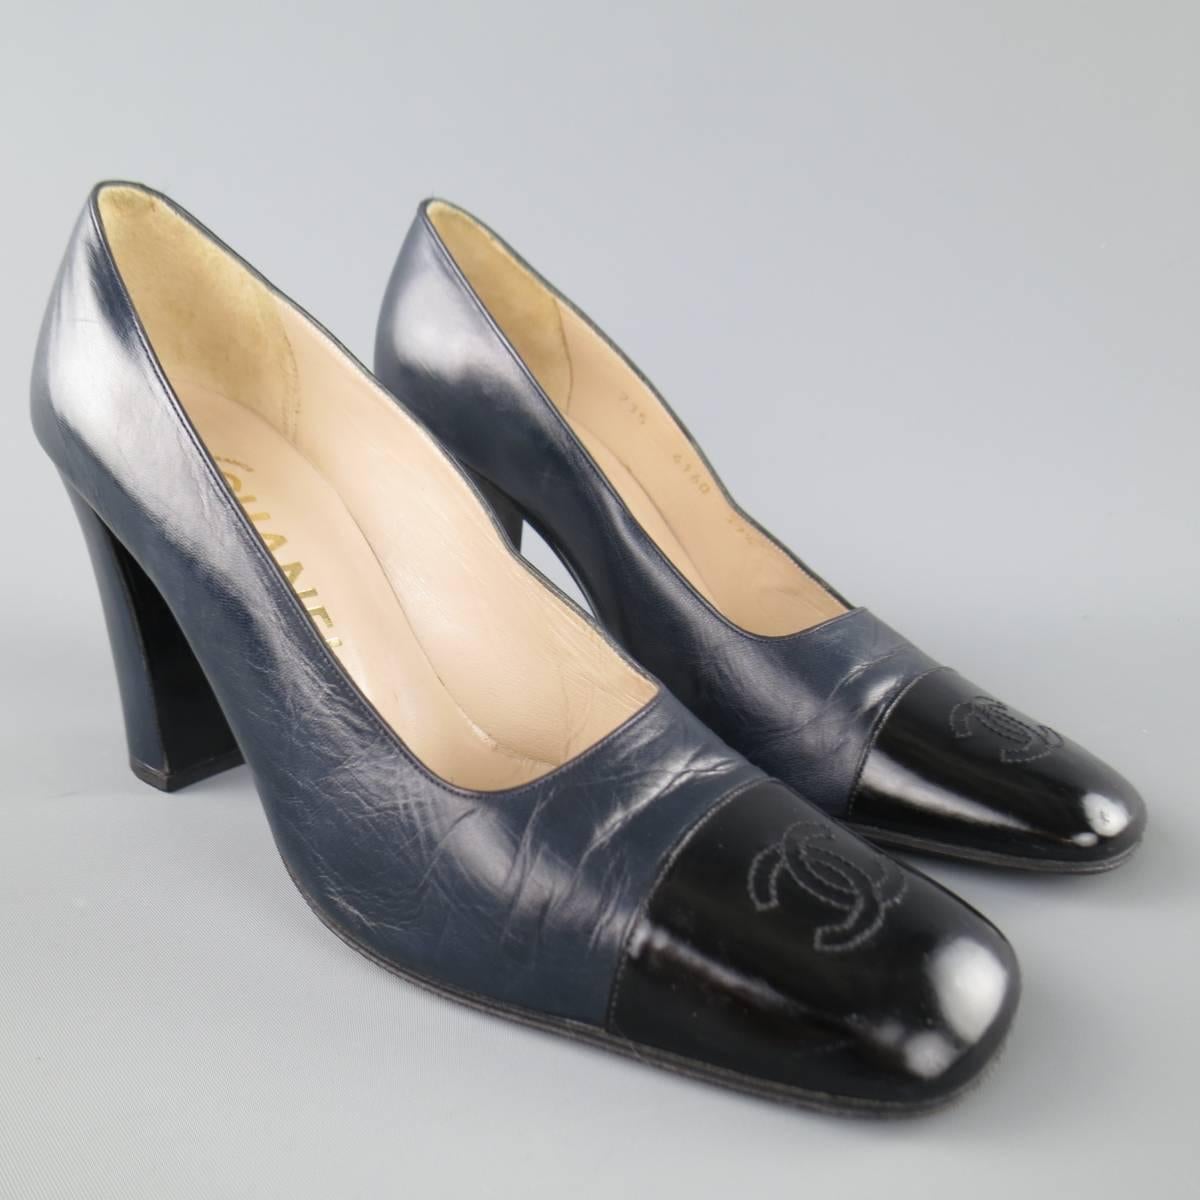 Vintage CHANEL pumps come in navy blue leather and feature a square cap toe with embroidered CC logo and thick covered heel. Made in France.
 
Good Pre-Owned Condition.
Marked: 37.5
 
Heel: 3.5 in.


Web ID: 82791 